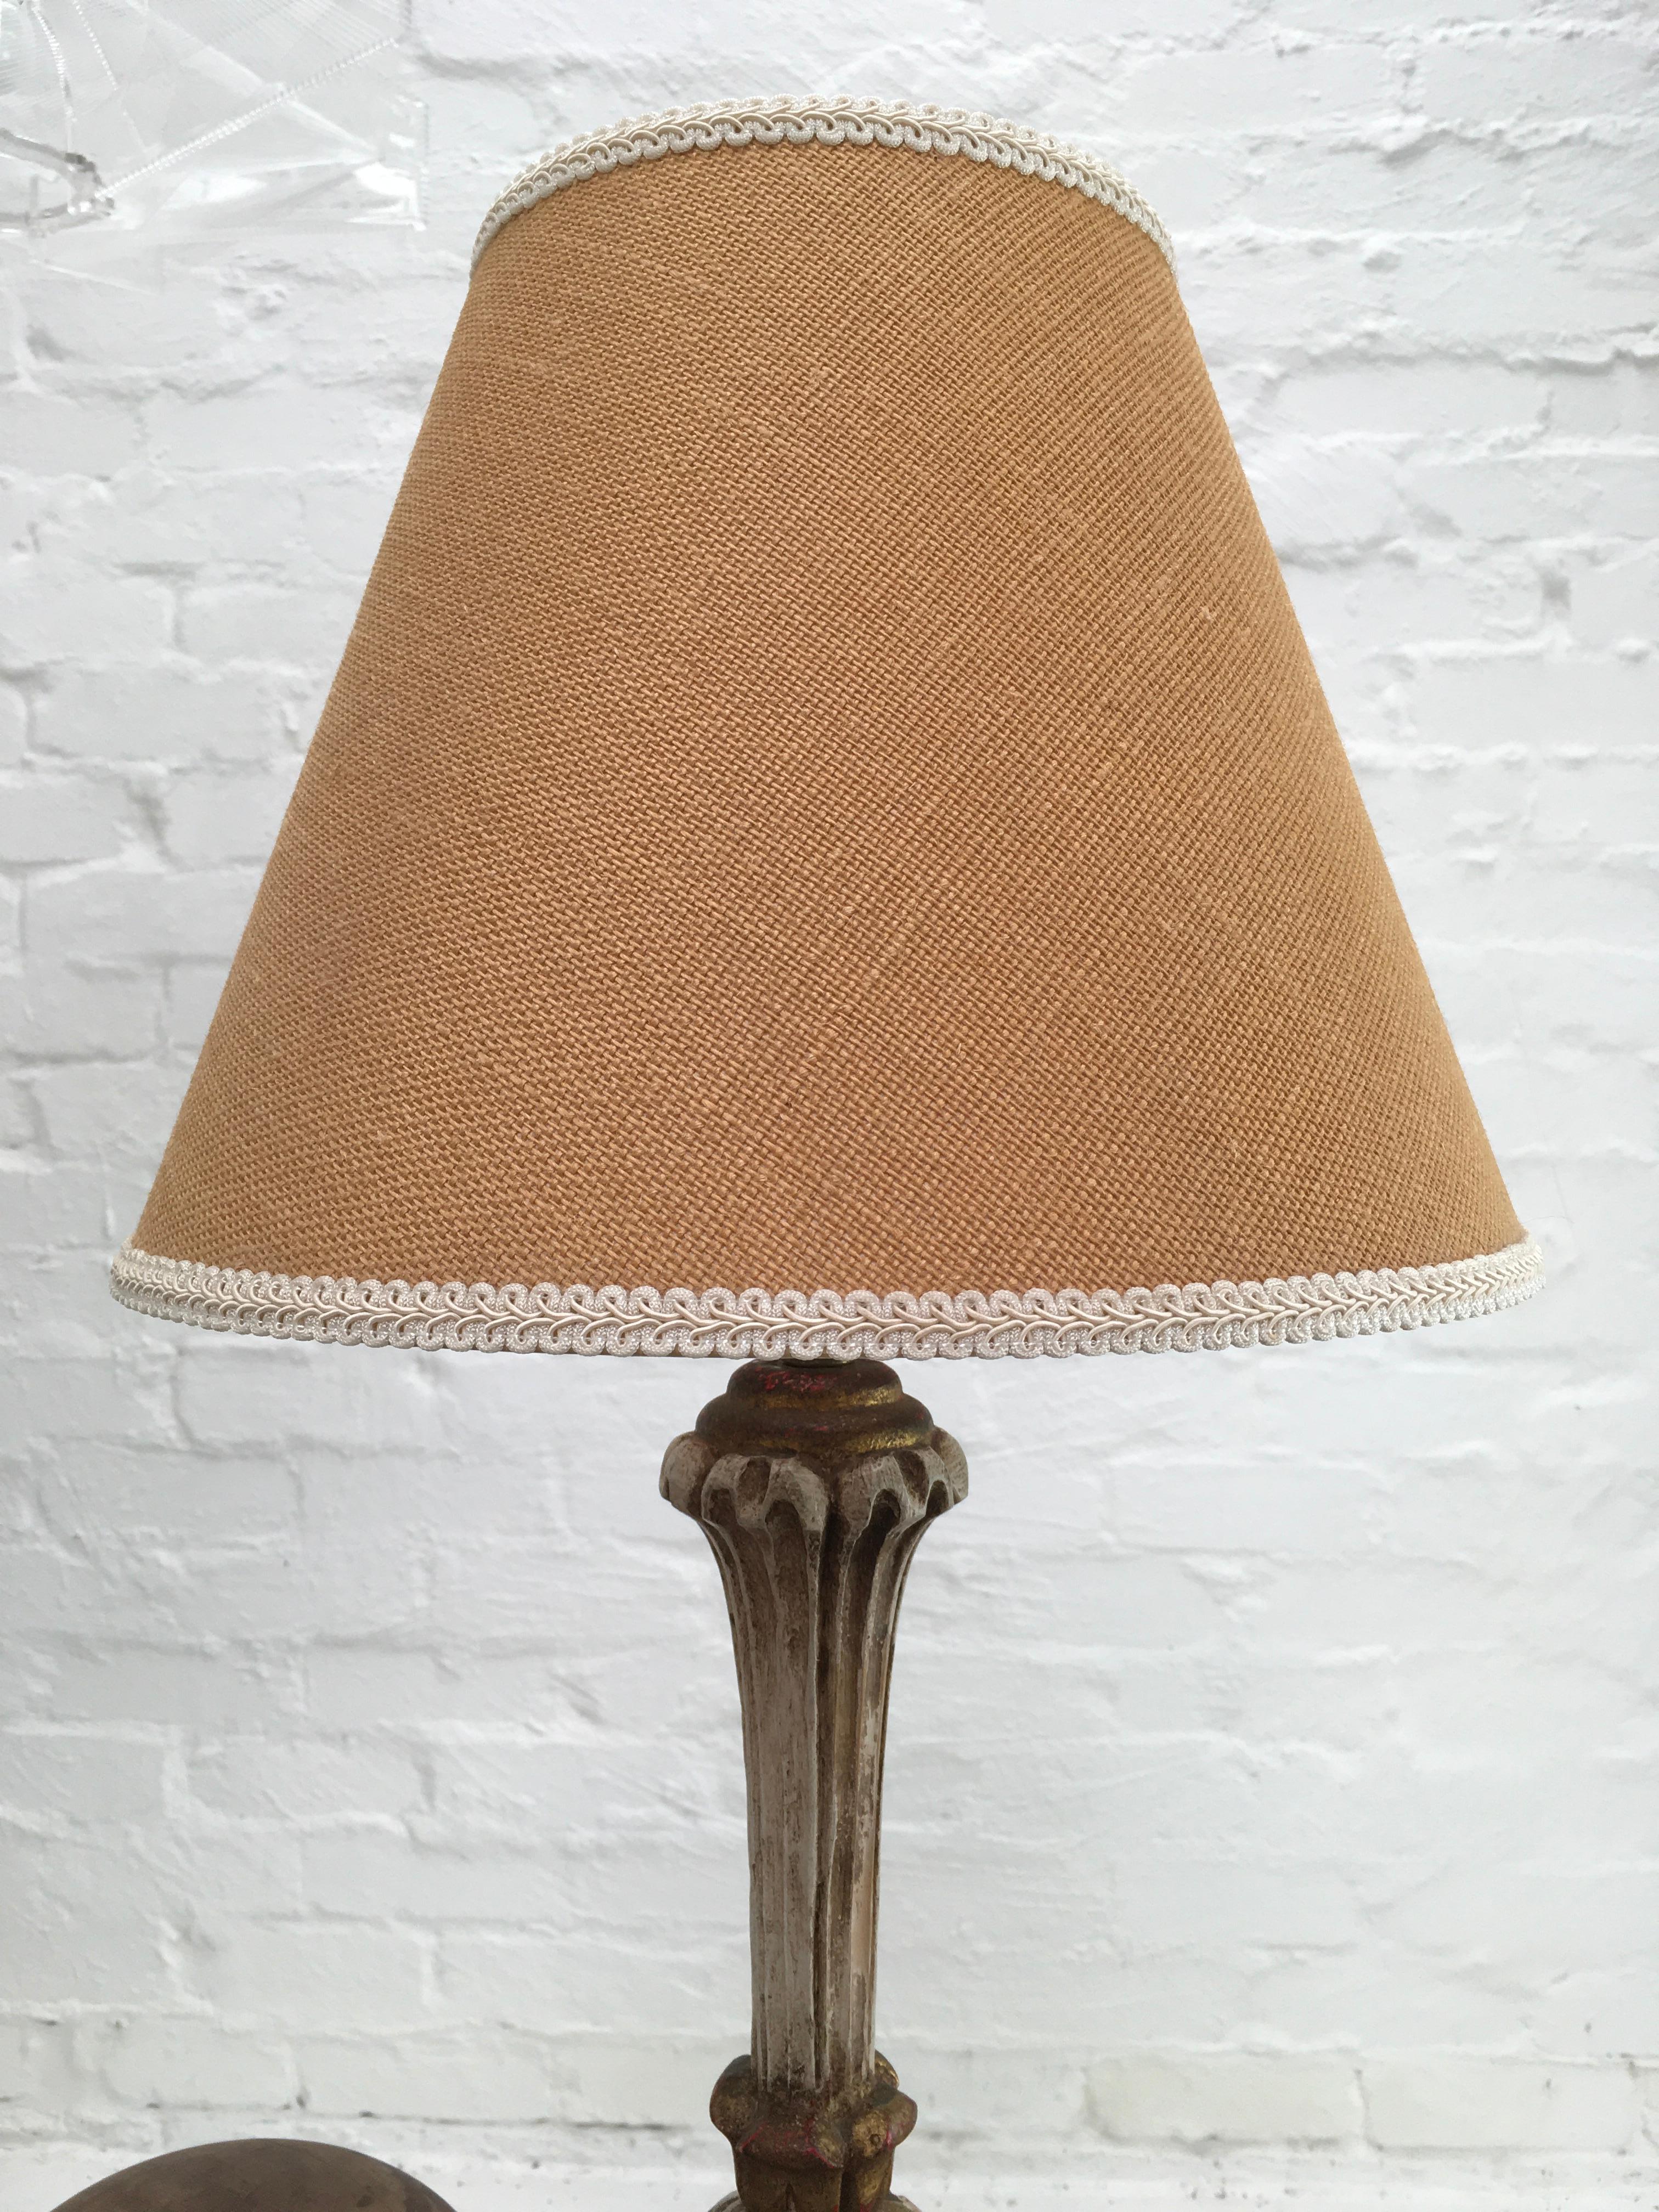 Mid-20th Century Florentine Giltwood Lamp with Original Shade Regency Style In Distressed Condition For Sale In Melbourne, AU